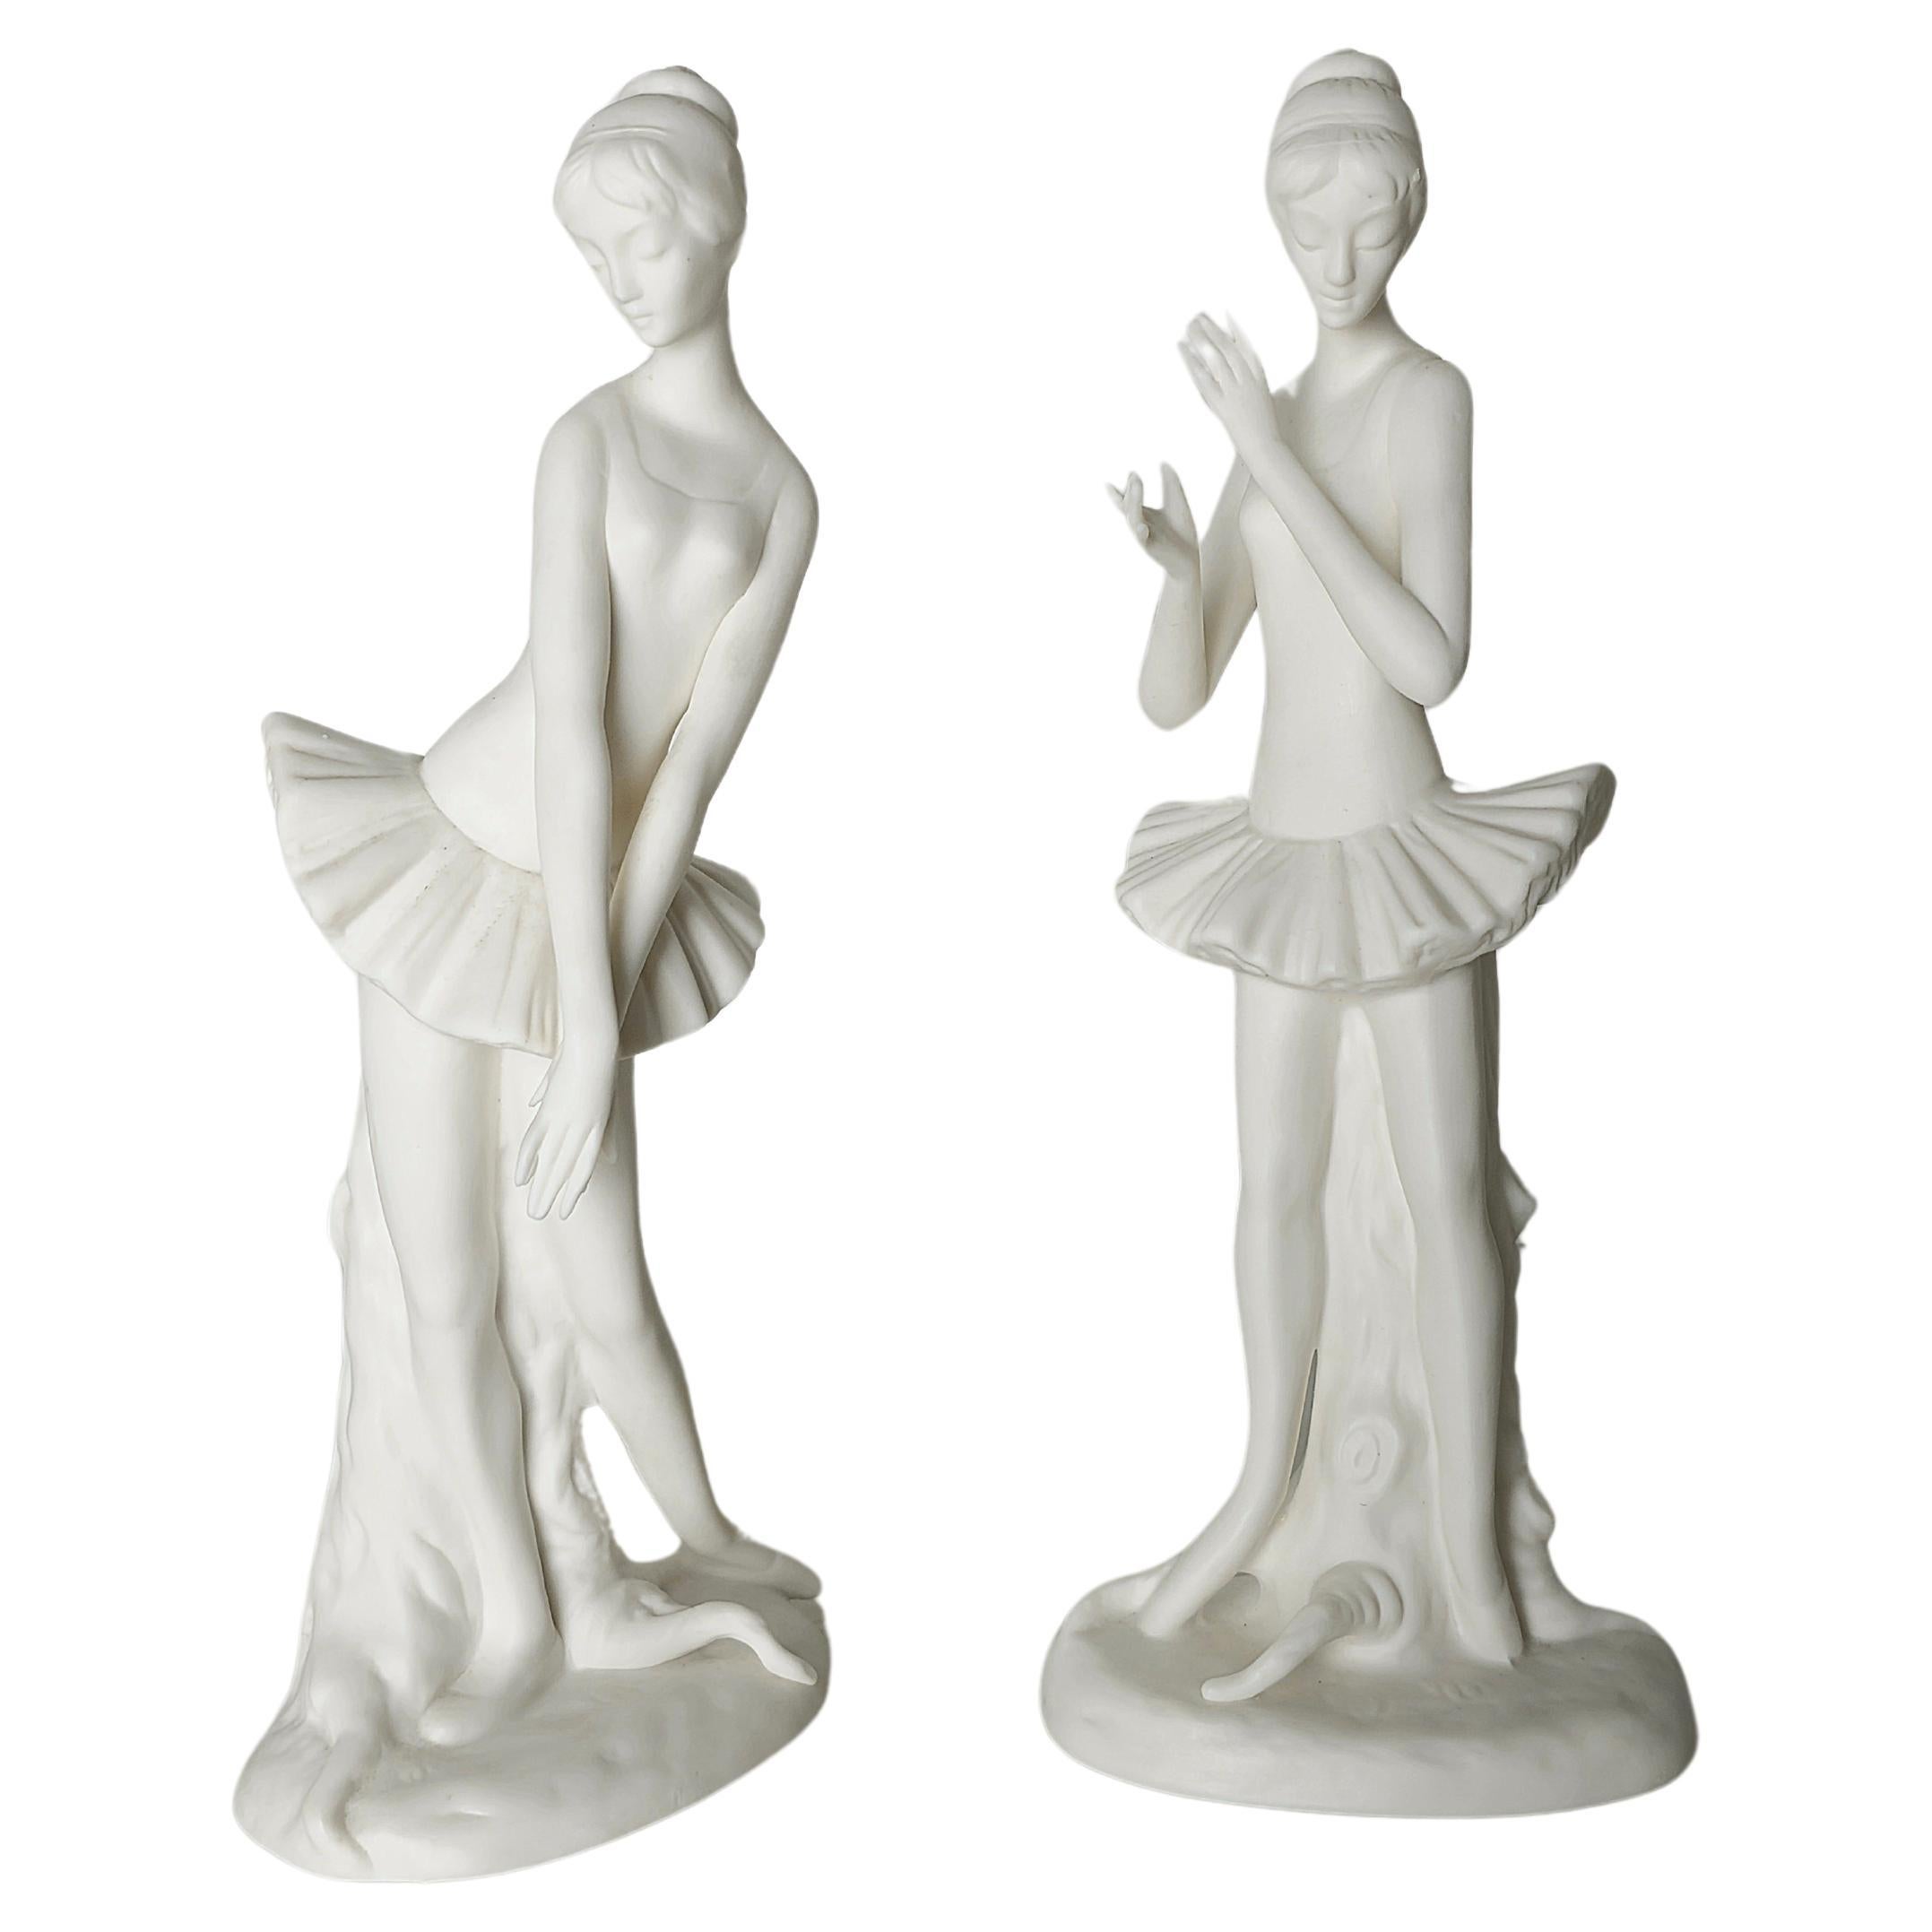 Sculptures Decorative Objects Porcelain Biscuit Midcentury Italy 1950s Set of 2 For Sale